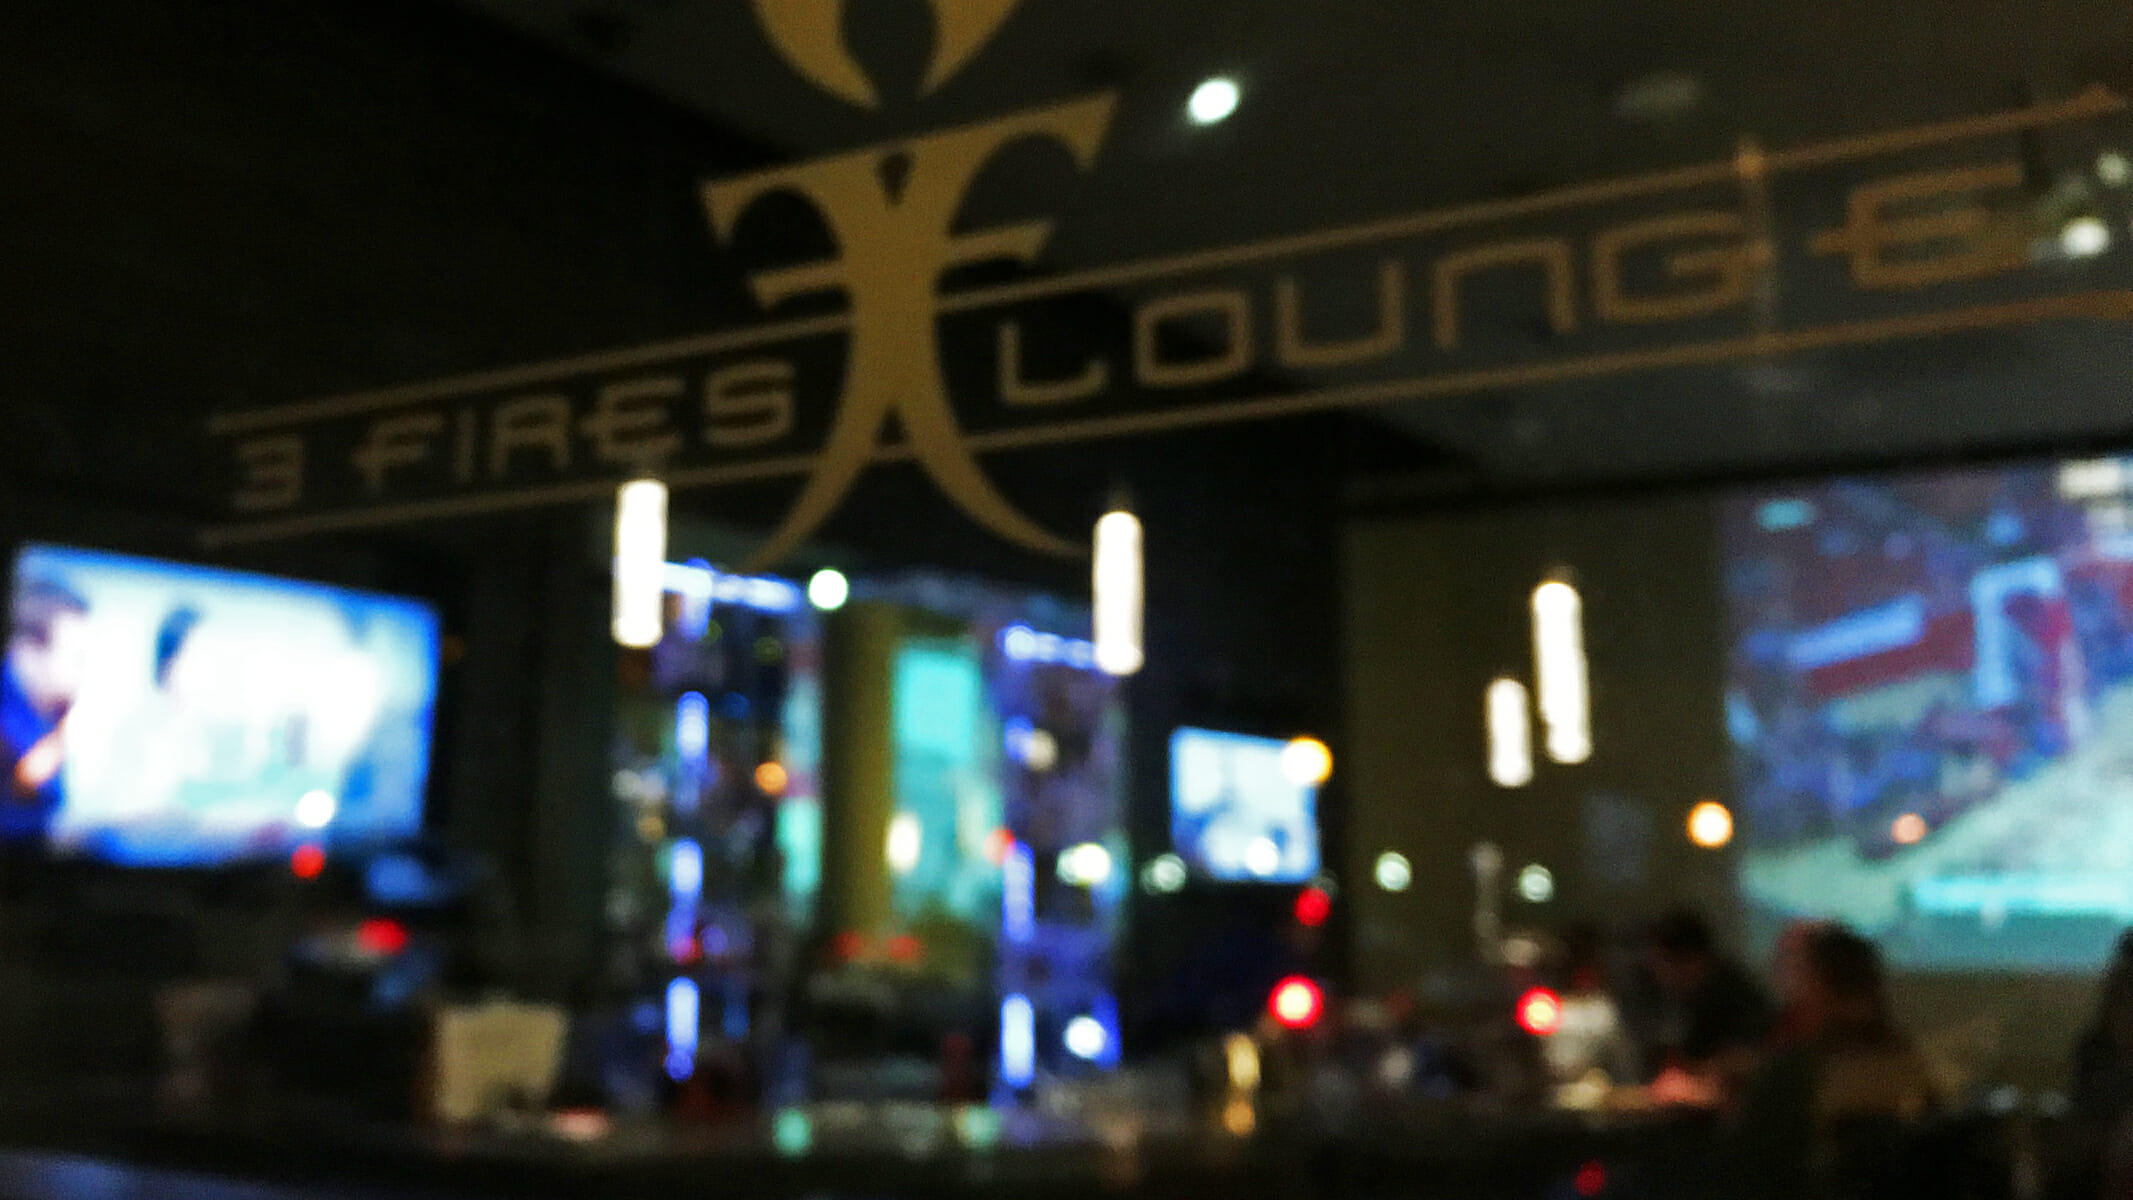 3 Fires Lounge